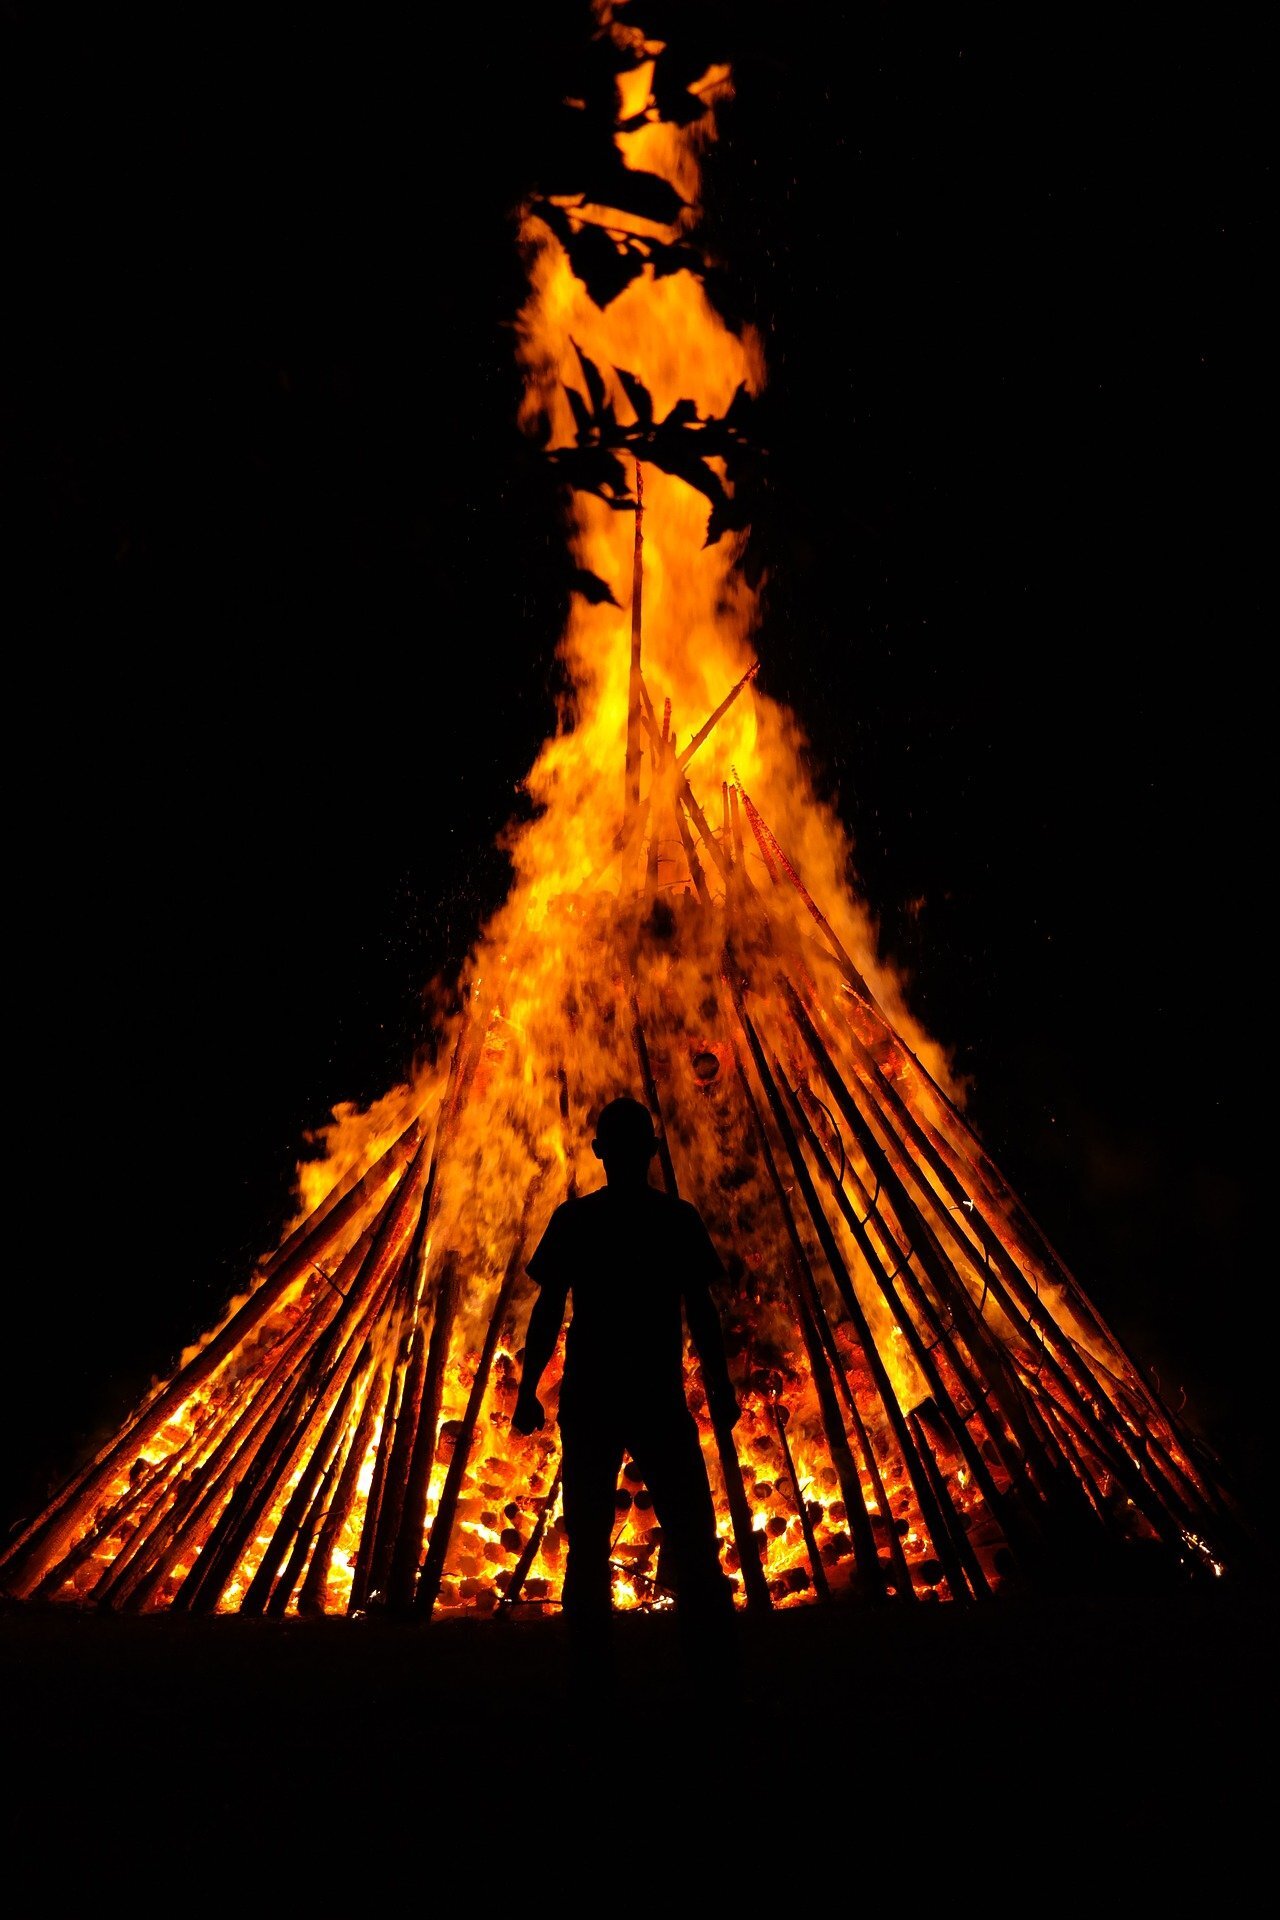 An image depicting a person in front of a bonfire.